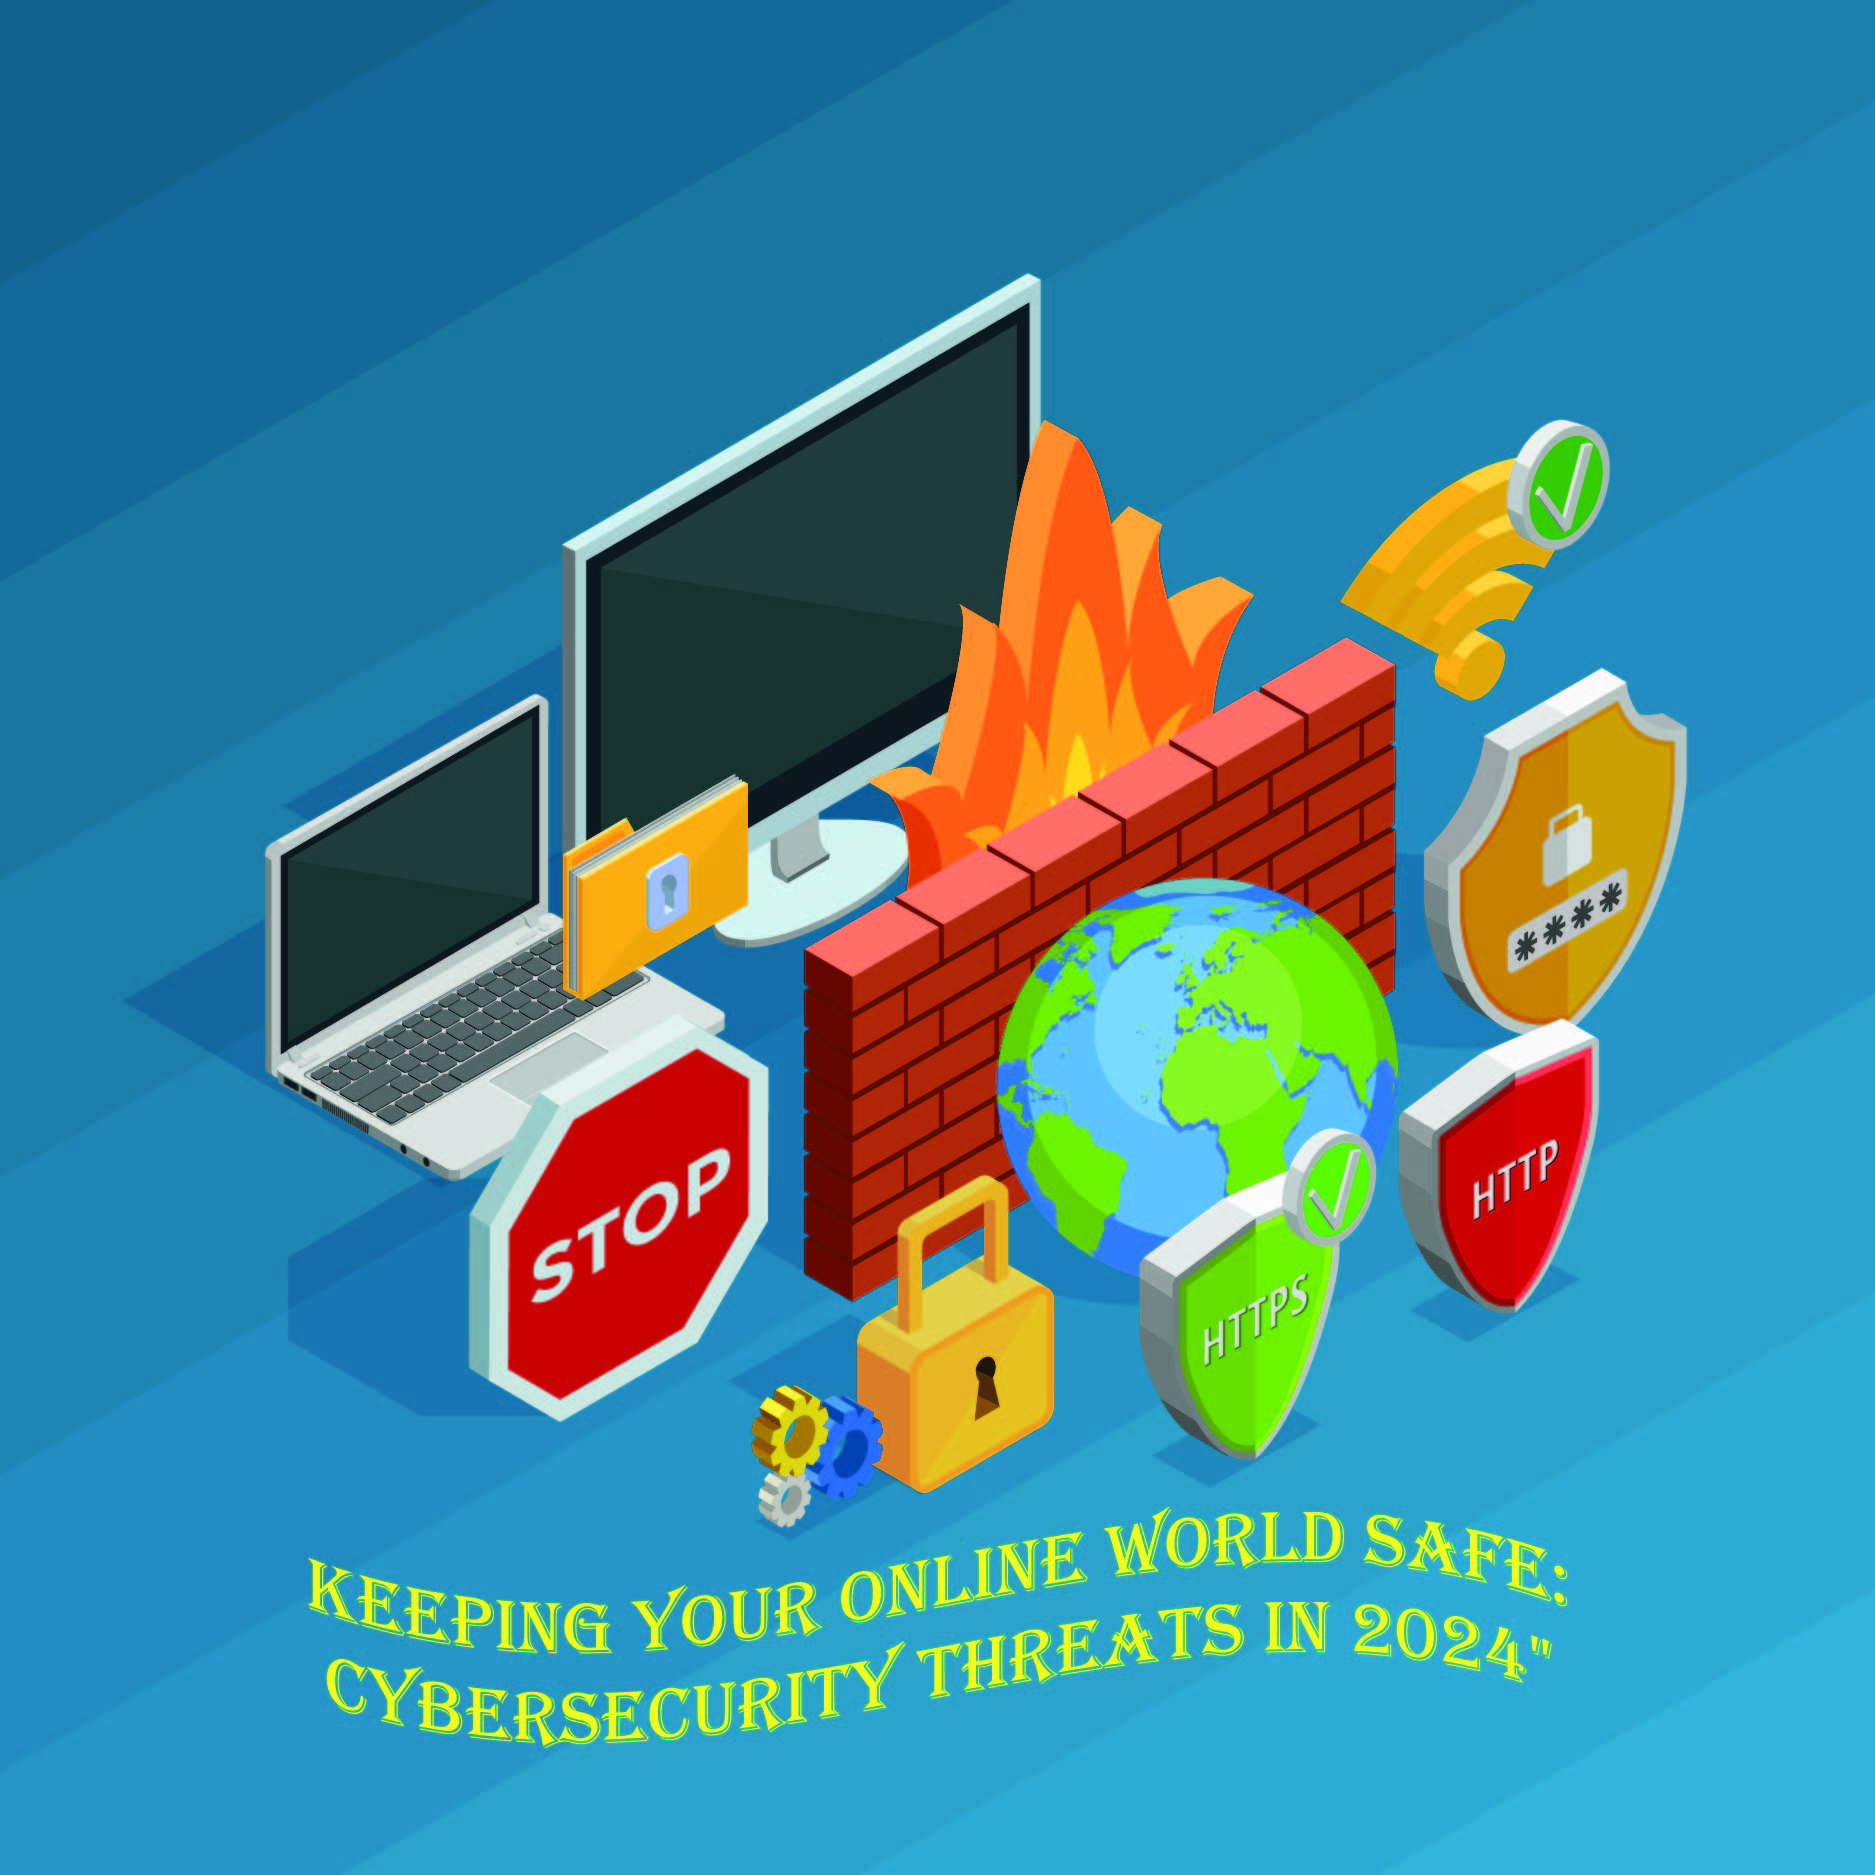 Keeping Your Online World Safe: Cybersecurity Threats in 2024"